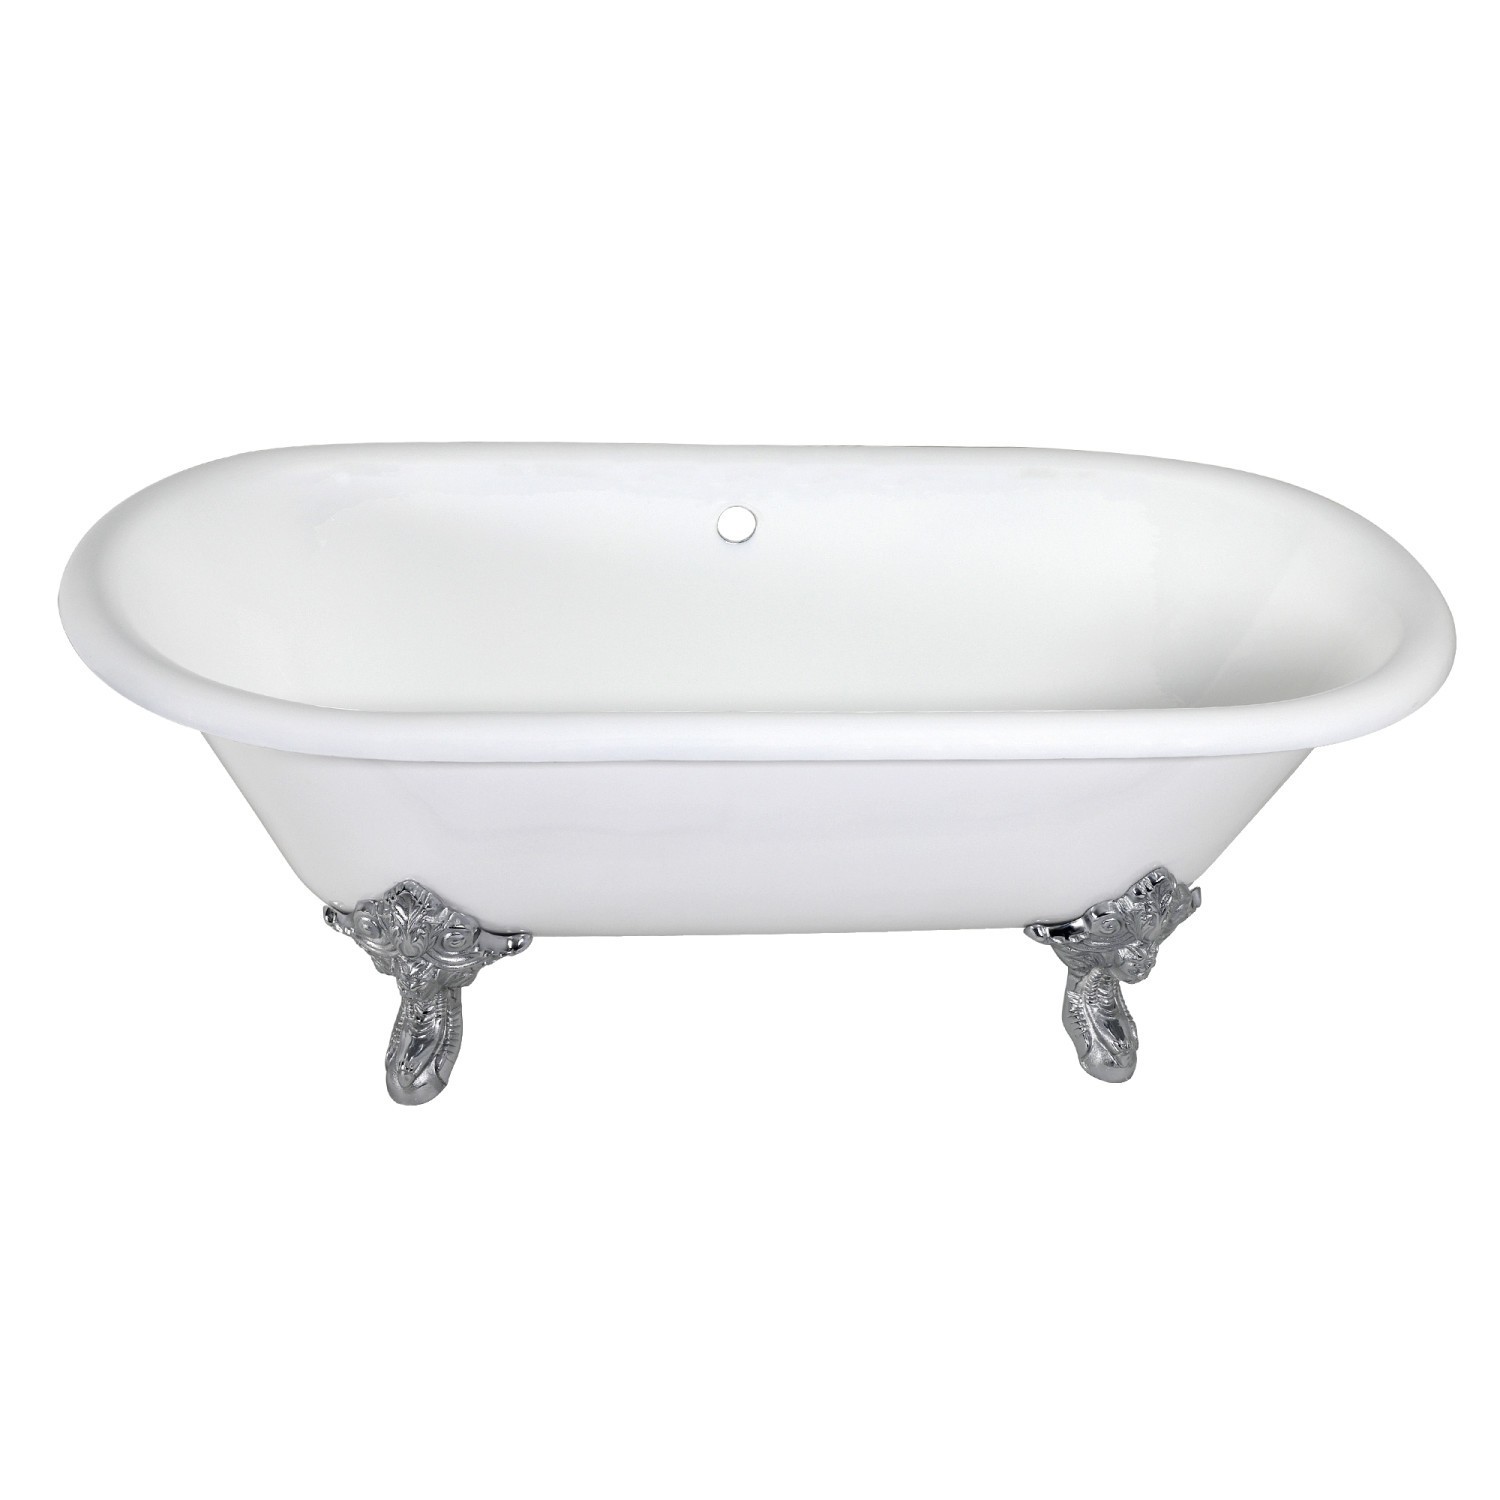 KINGSTON BRASS VCTDE7232NL1 AQUA EDEN 72-INCH CAST IRON DOUBLE ENDED CLAWFOOT TUB WITH FEET NO DRILLINGS